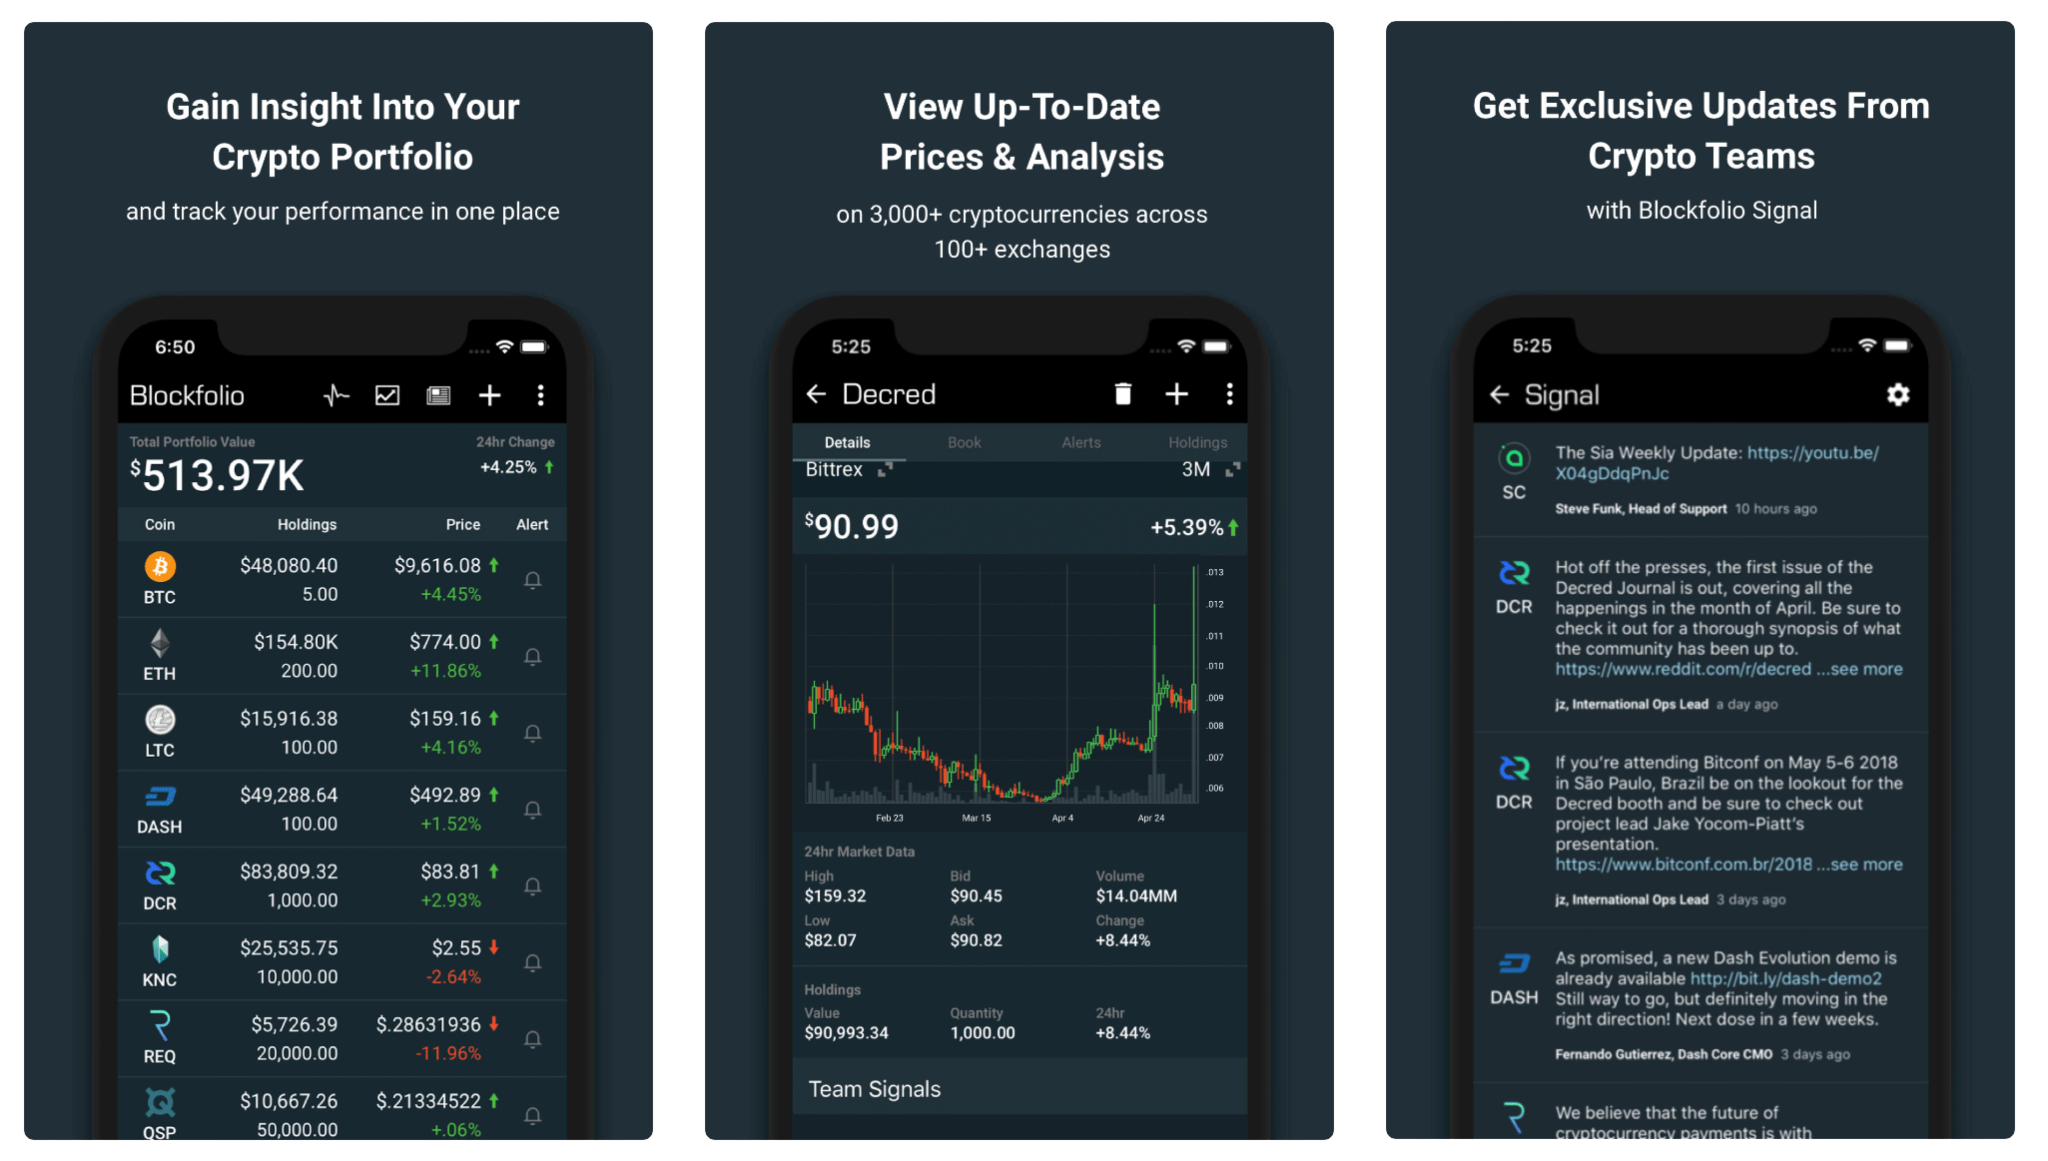 Three screenshots from Blockfolio, a cryptocurrency app. The first shows a performance tracker, the second shows up-to-date prices and analysis, and the third shows updates.